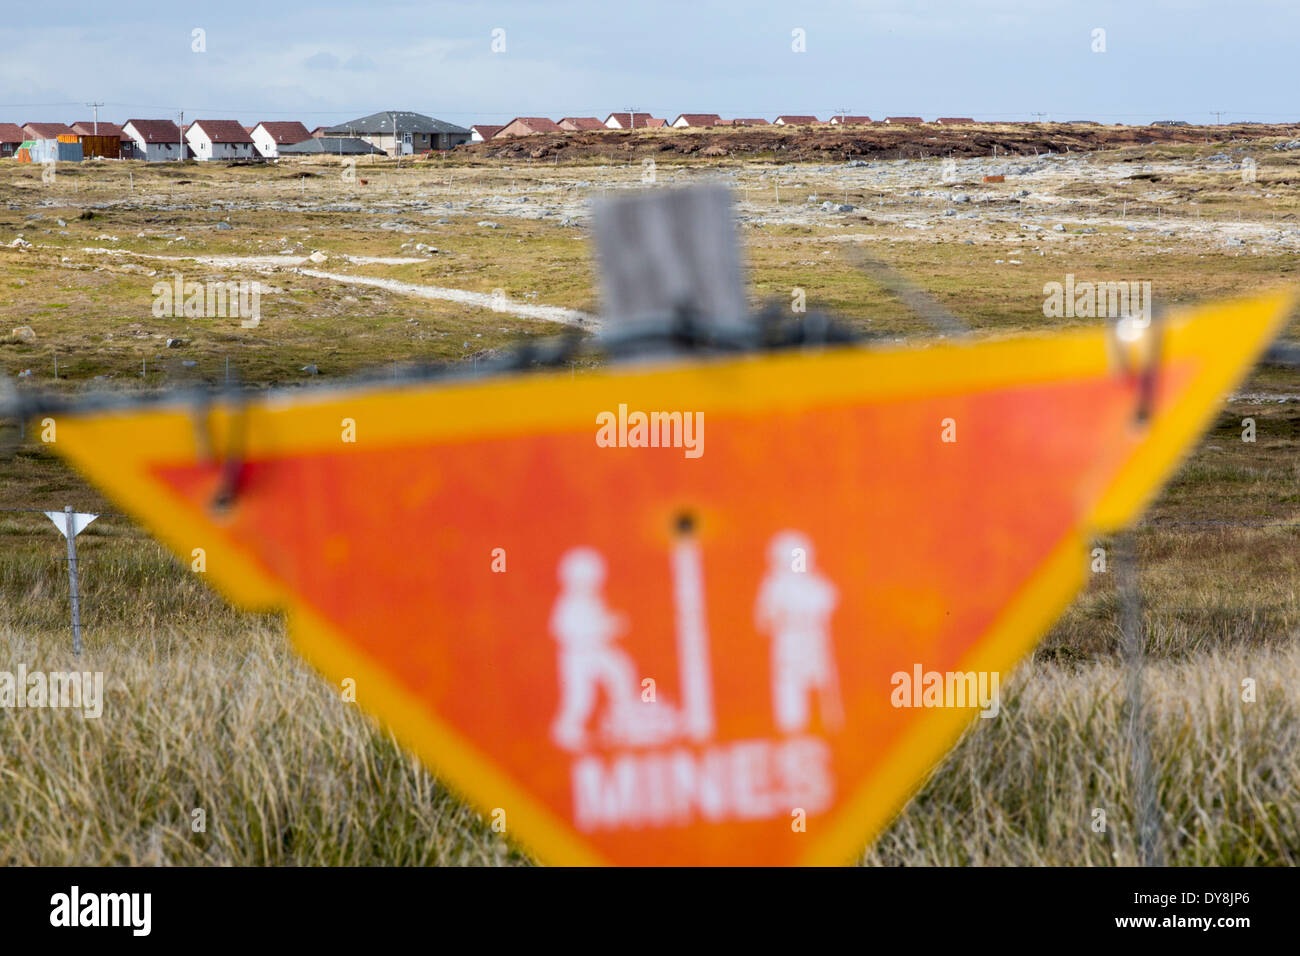 A warning sign about the presence of Argentinian mines on the Falkands, left over from the 1980's Falklands conflict Stock Photo